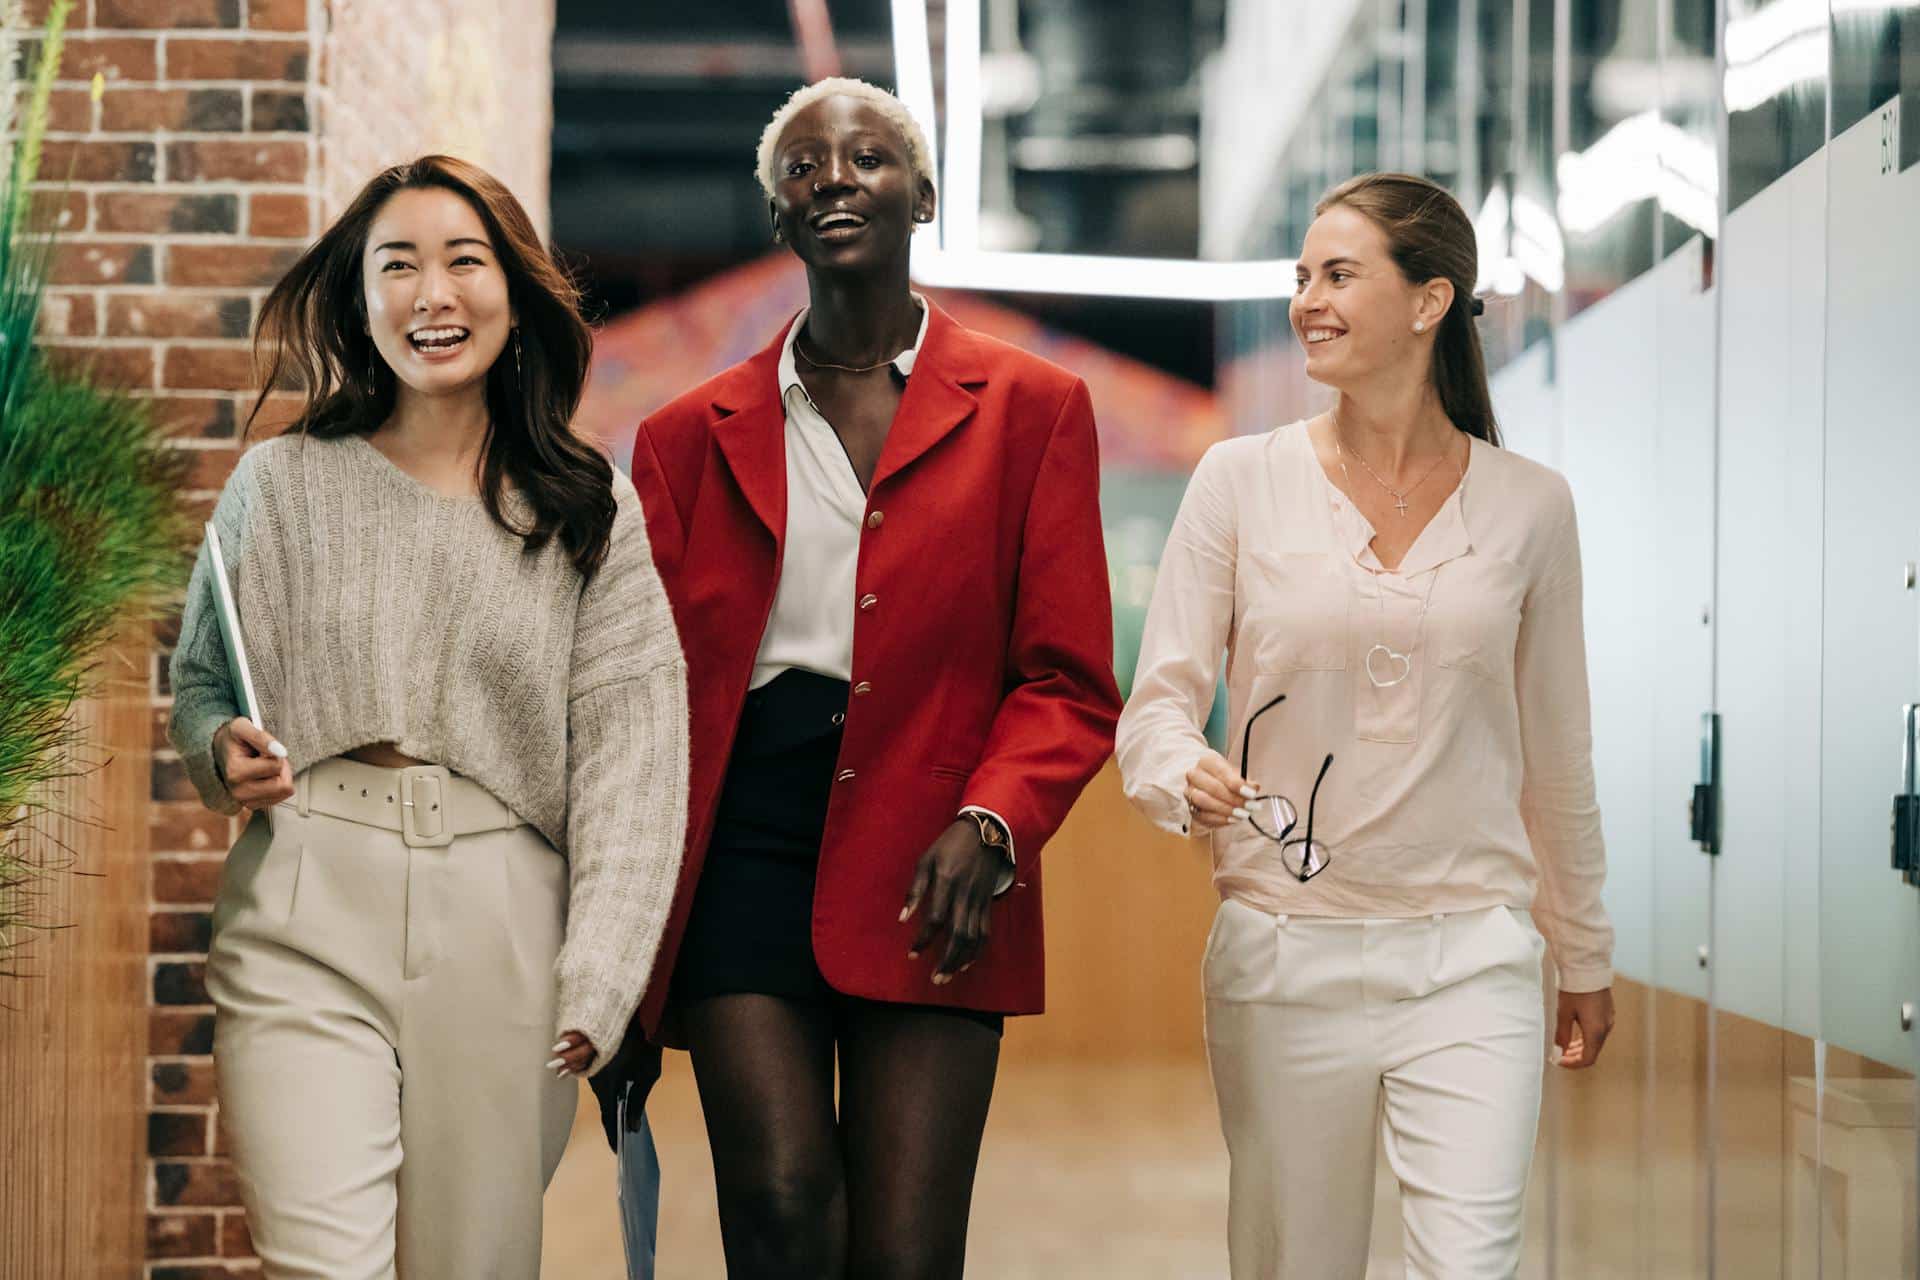 A group of 3 business women walking and smiling